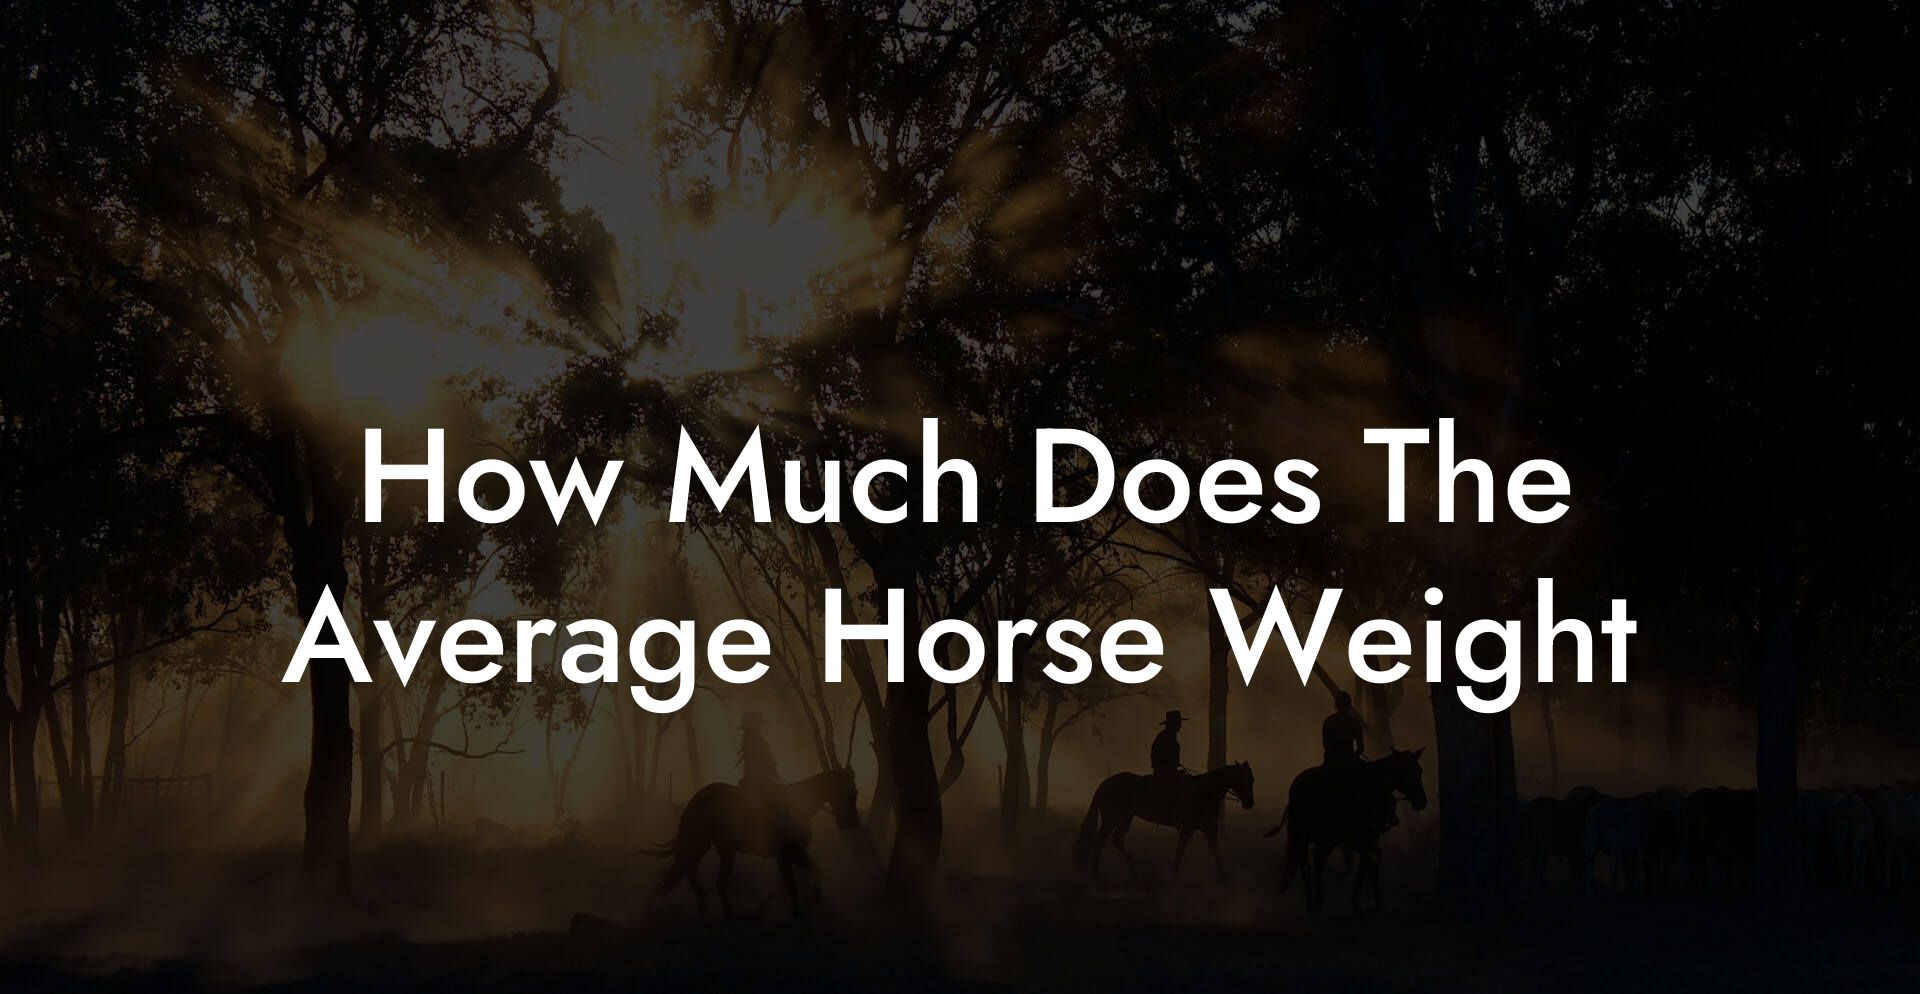 How Much Does The Average Horse Weight